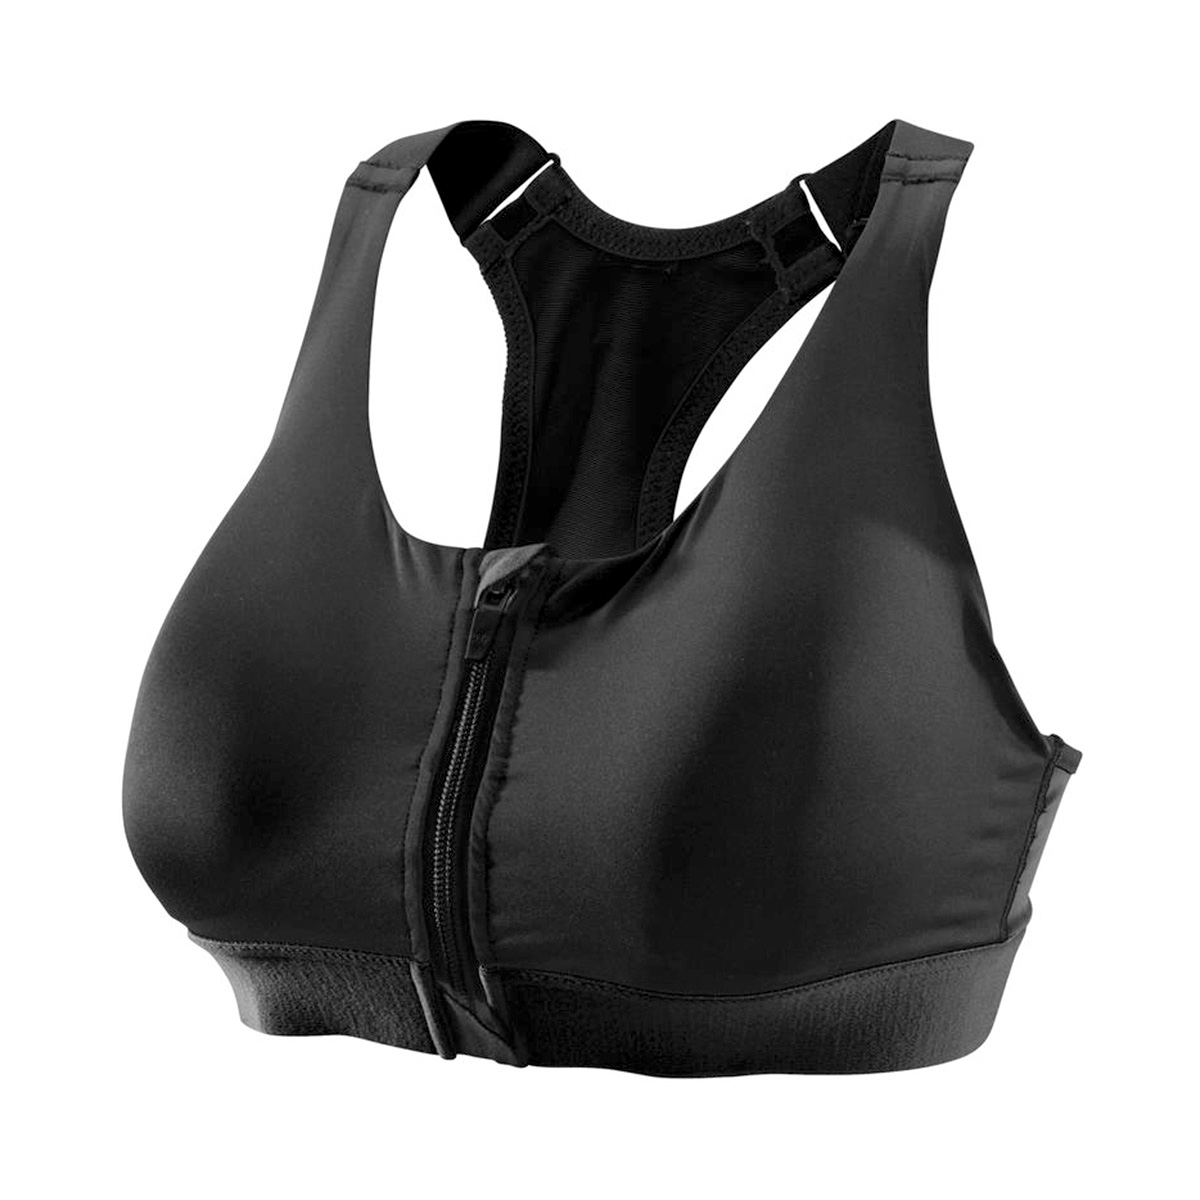 900 Women'S Fitness Cardio Training Zip-Up Sports Bra - Black - Stay  Comfortable And Supported During Cardio Workouts